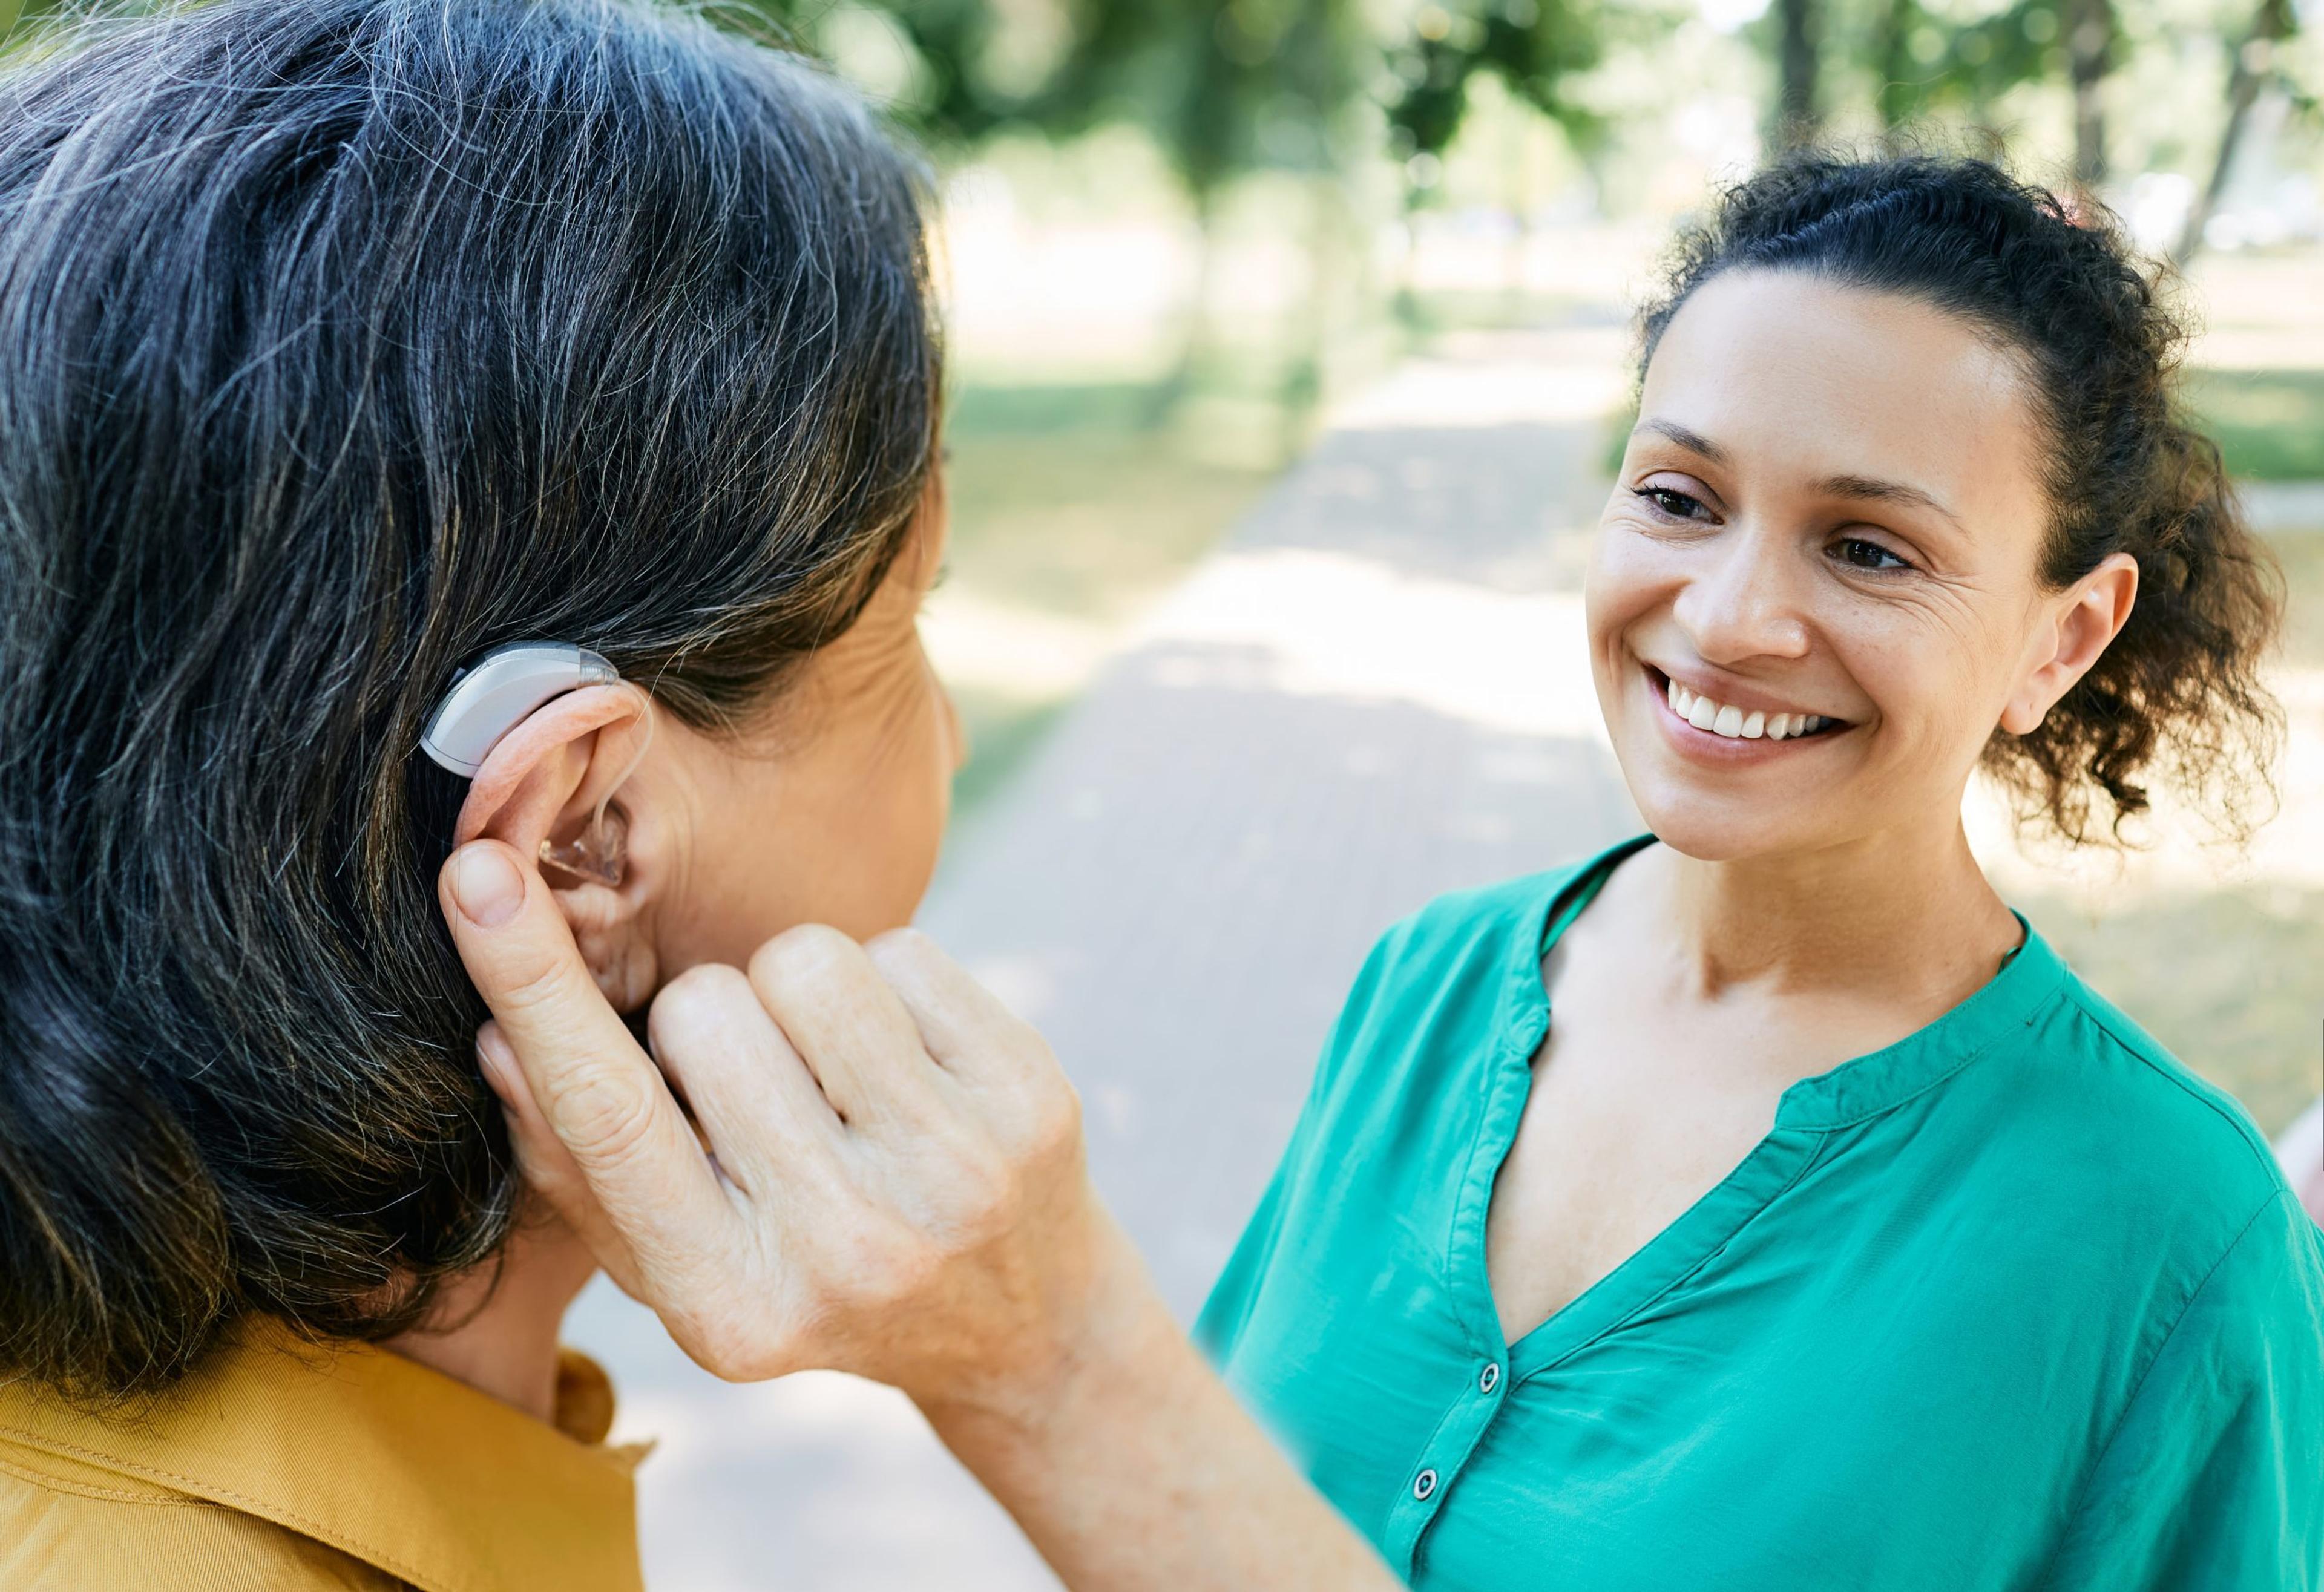 By mid-October, adults will be able to purchase hearing aids over the counter without a prescription. Here's everything you need to know.